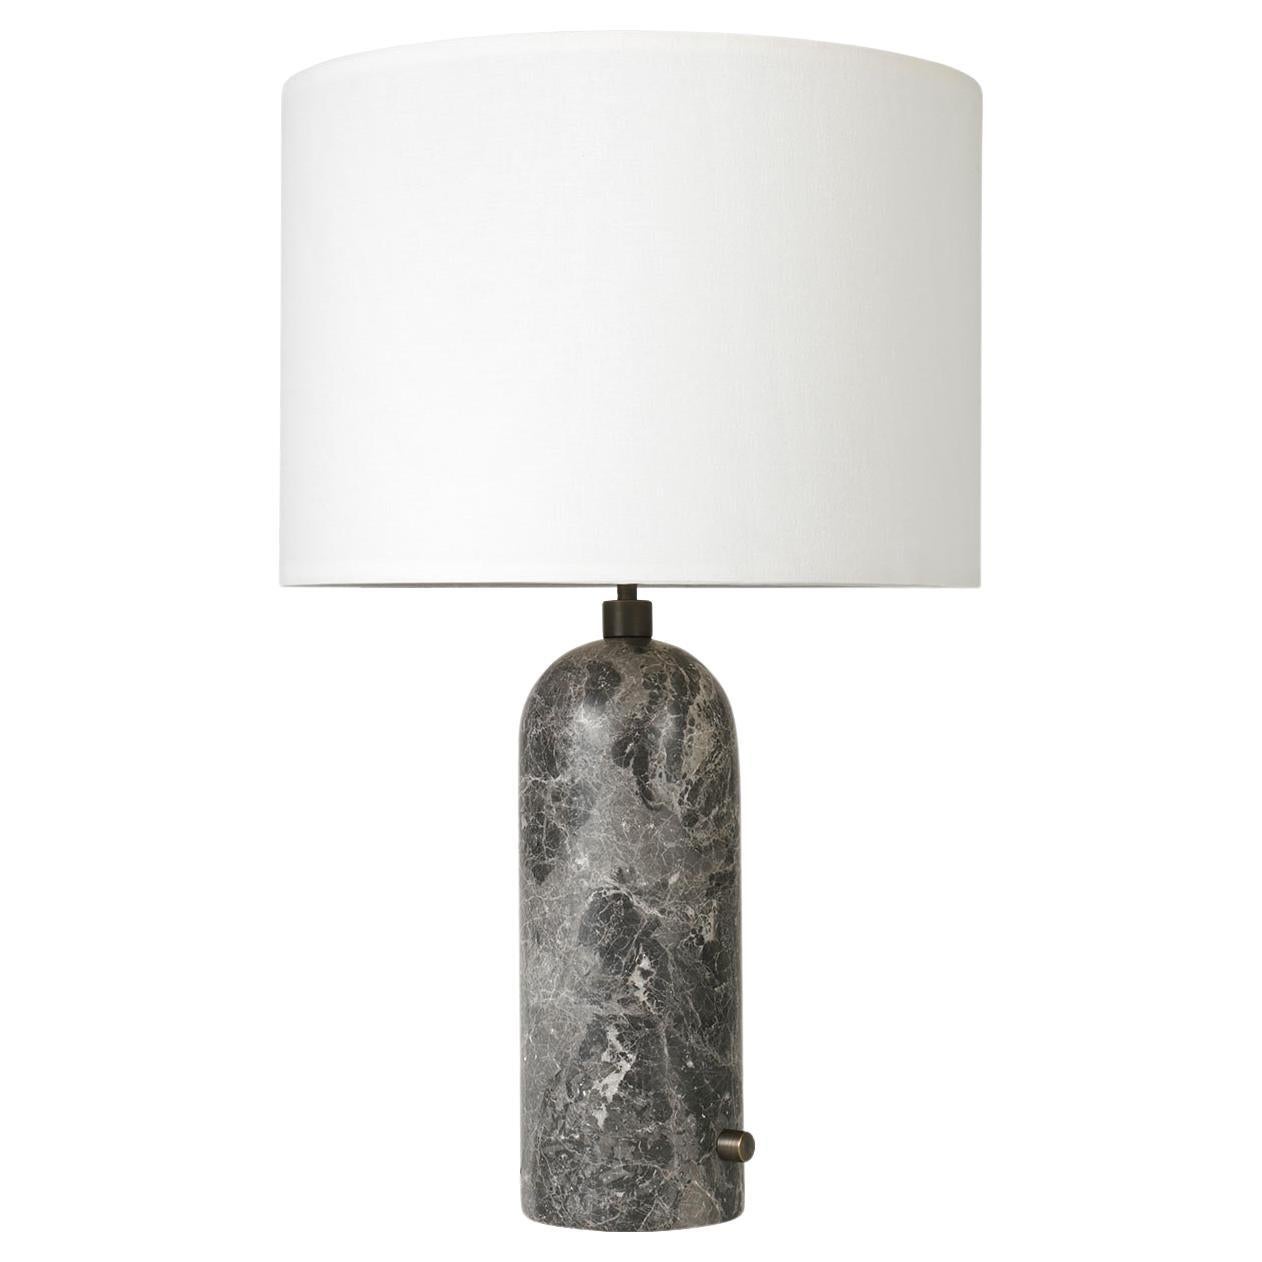 Gravity Table Lamp - Large, Grey Marble, White For Sale